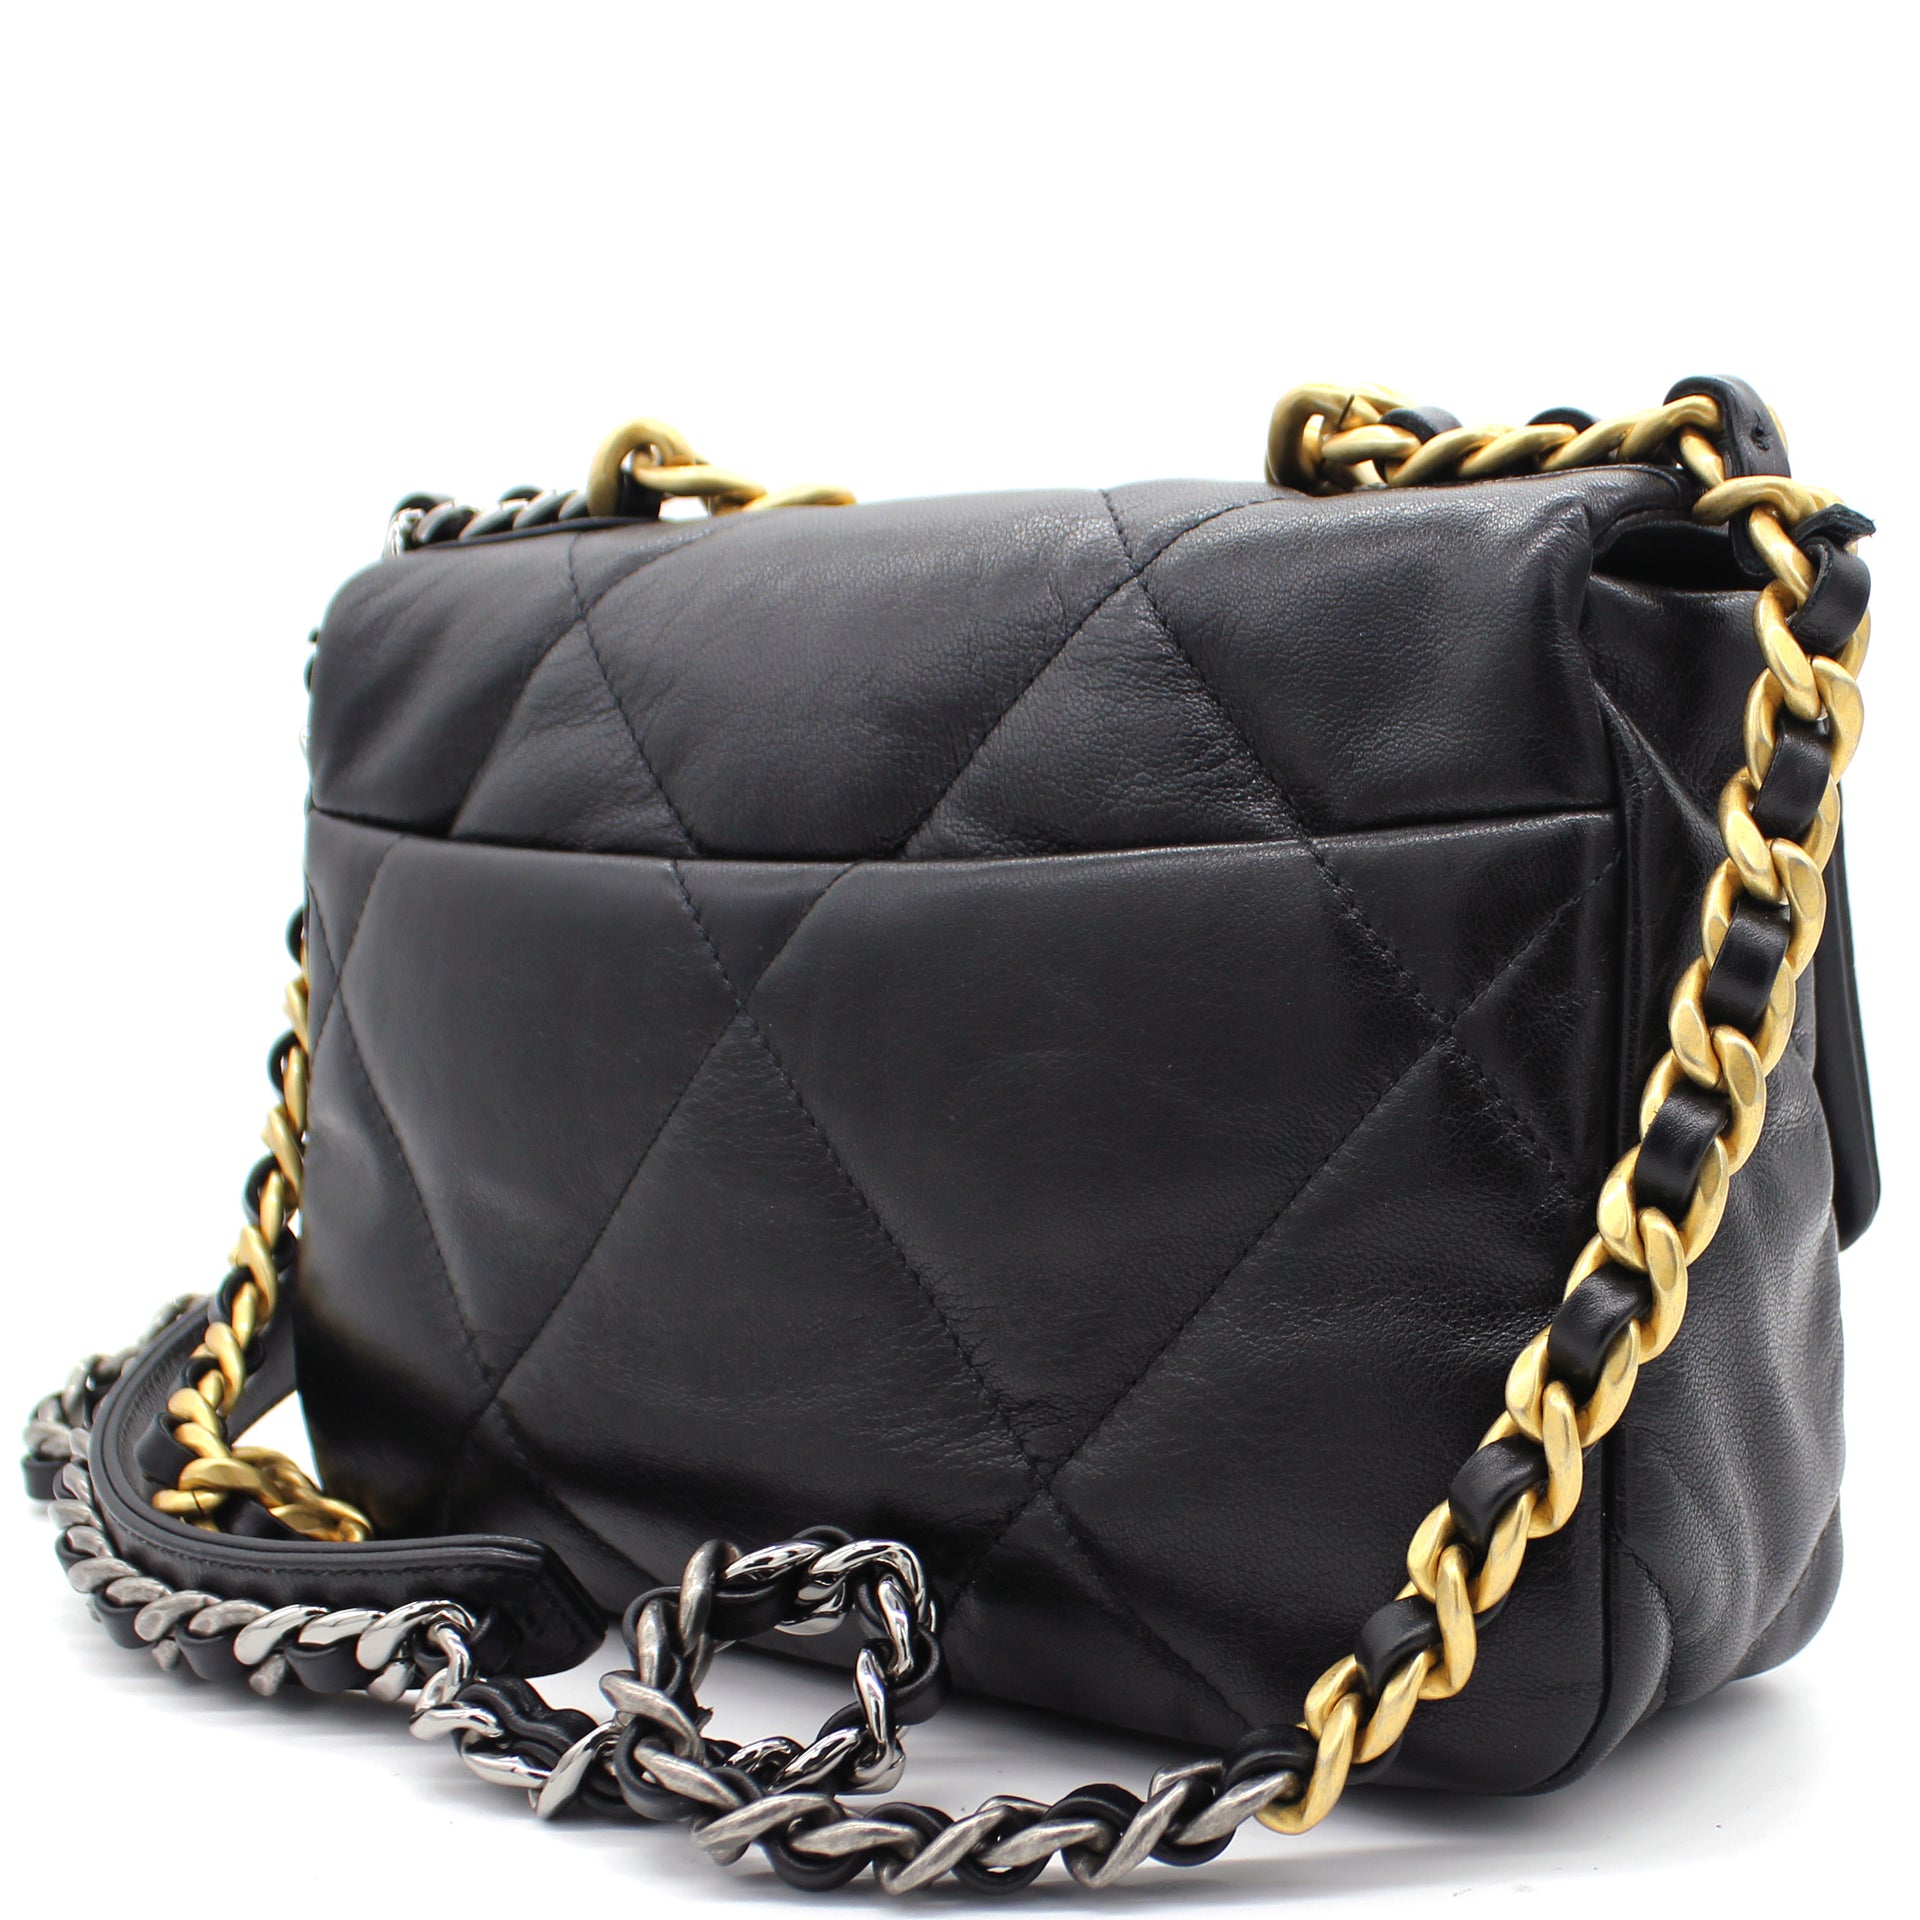 Chanel Black Quilted Lambskin Leather CC Turn Lock Chain Tote Bag